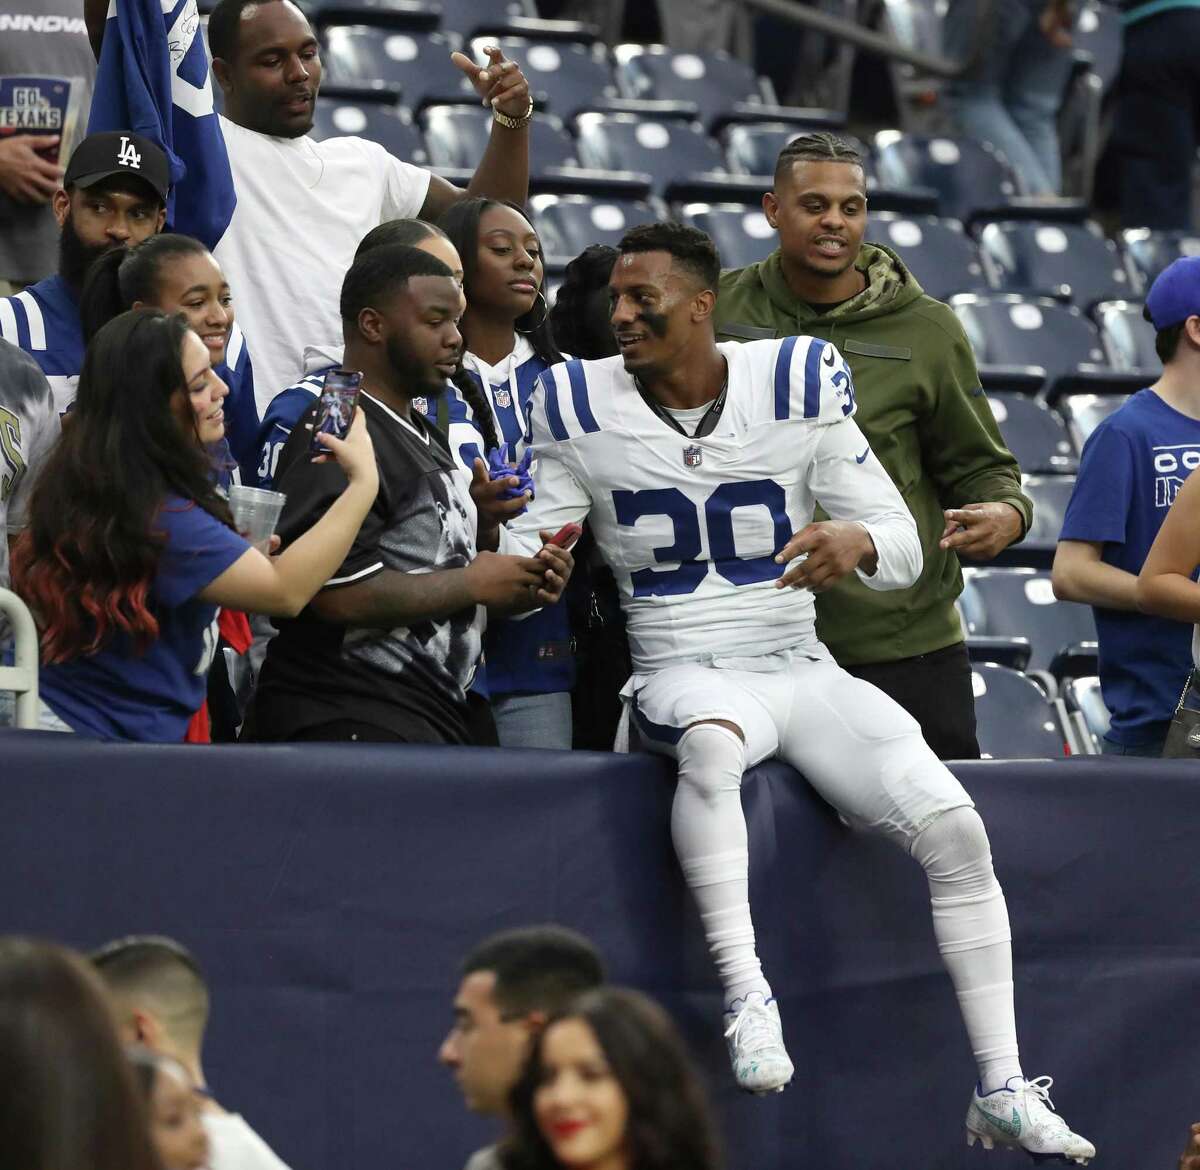 Indianapolis Colts safety George Odum (30) celebrates the Colts 31-0 victory over the Houston Texans after an NFL football game at NRG Stadium, Sunday, Dec. 5, 2021 in Houston.